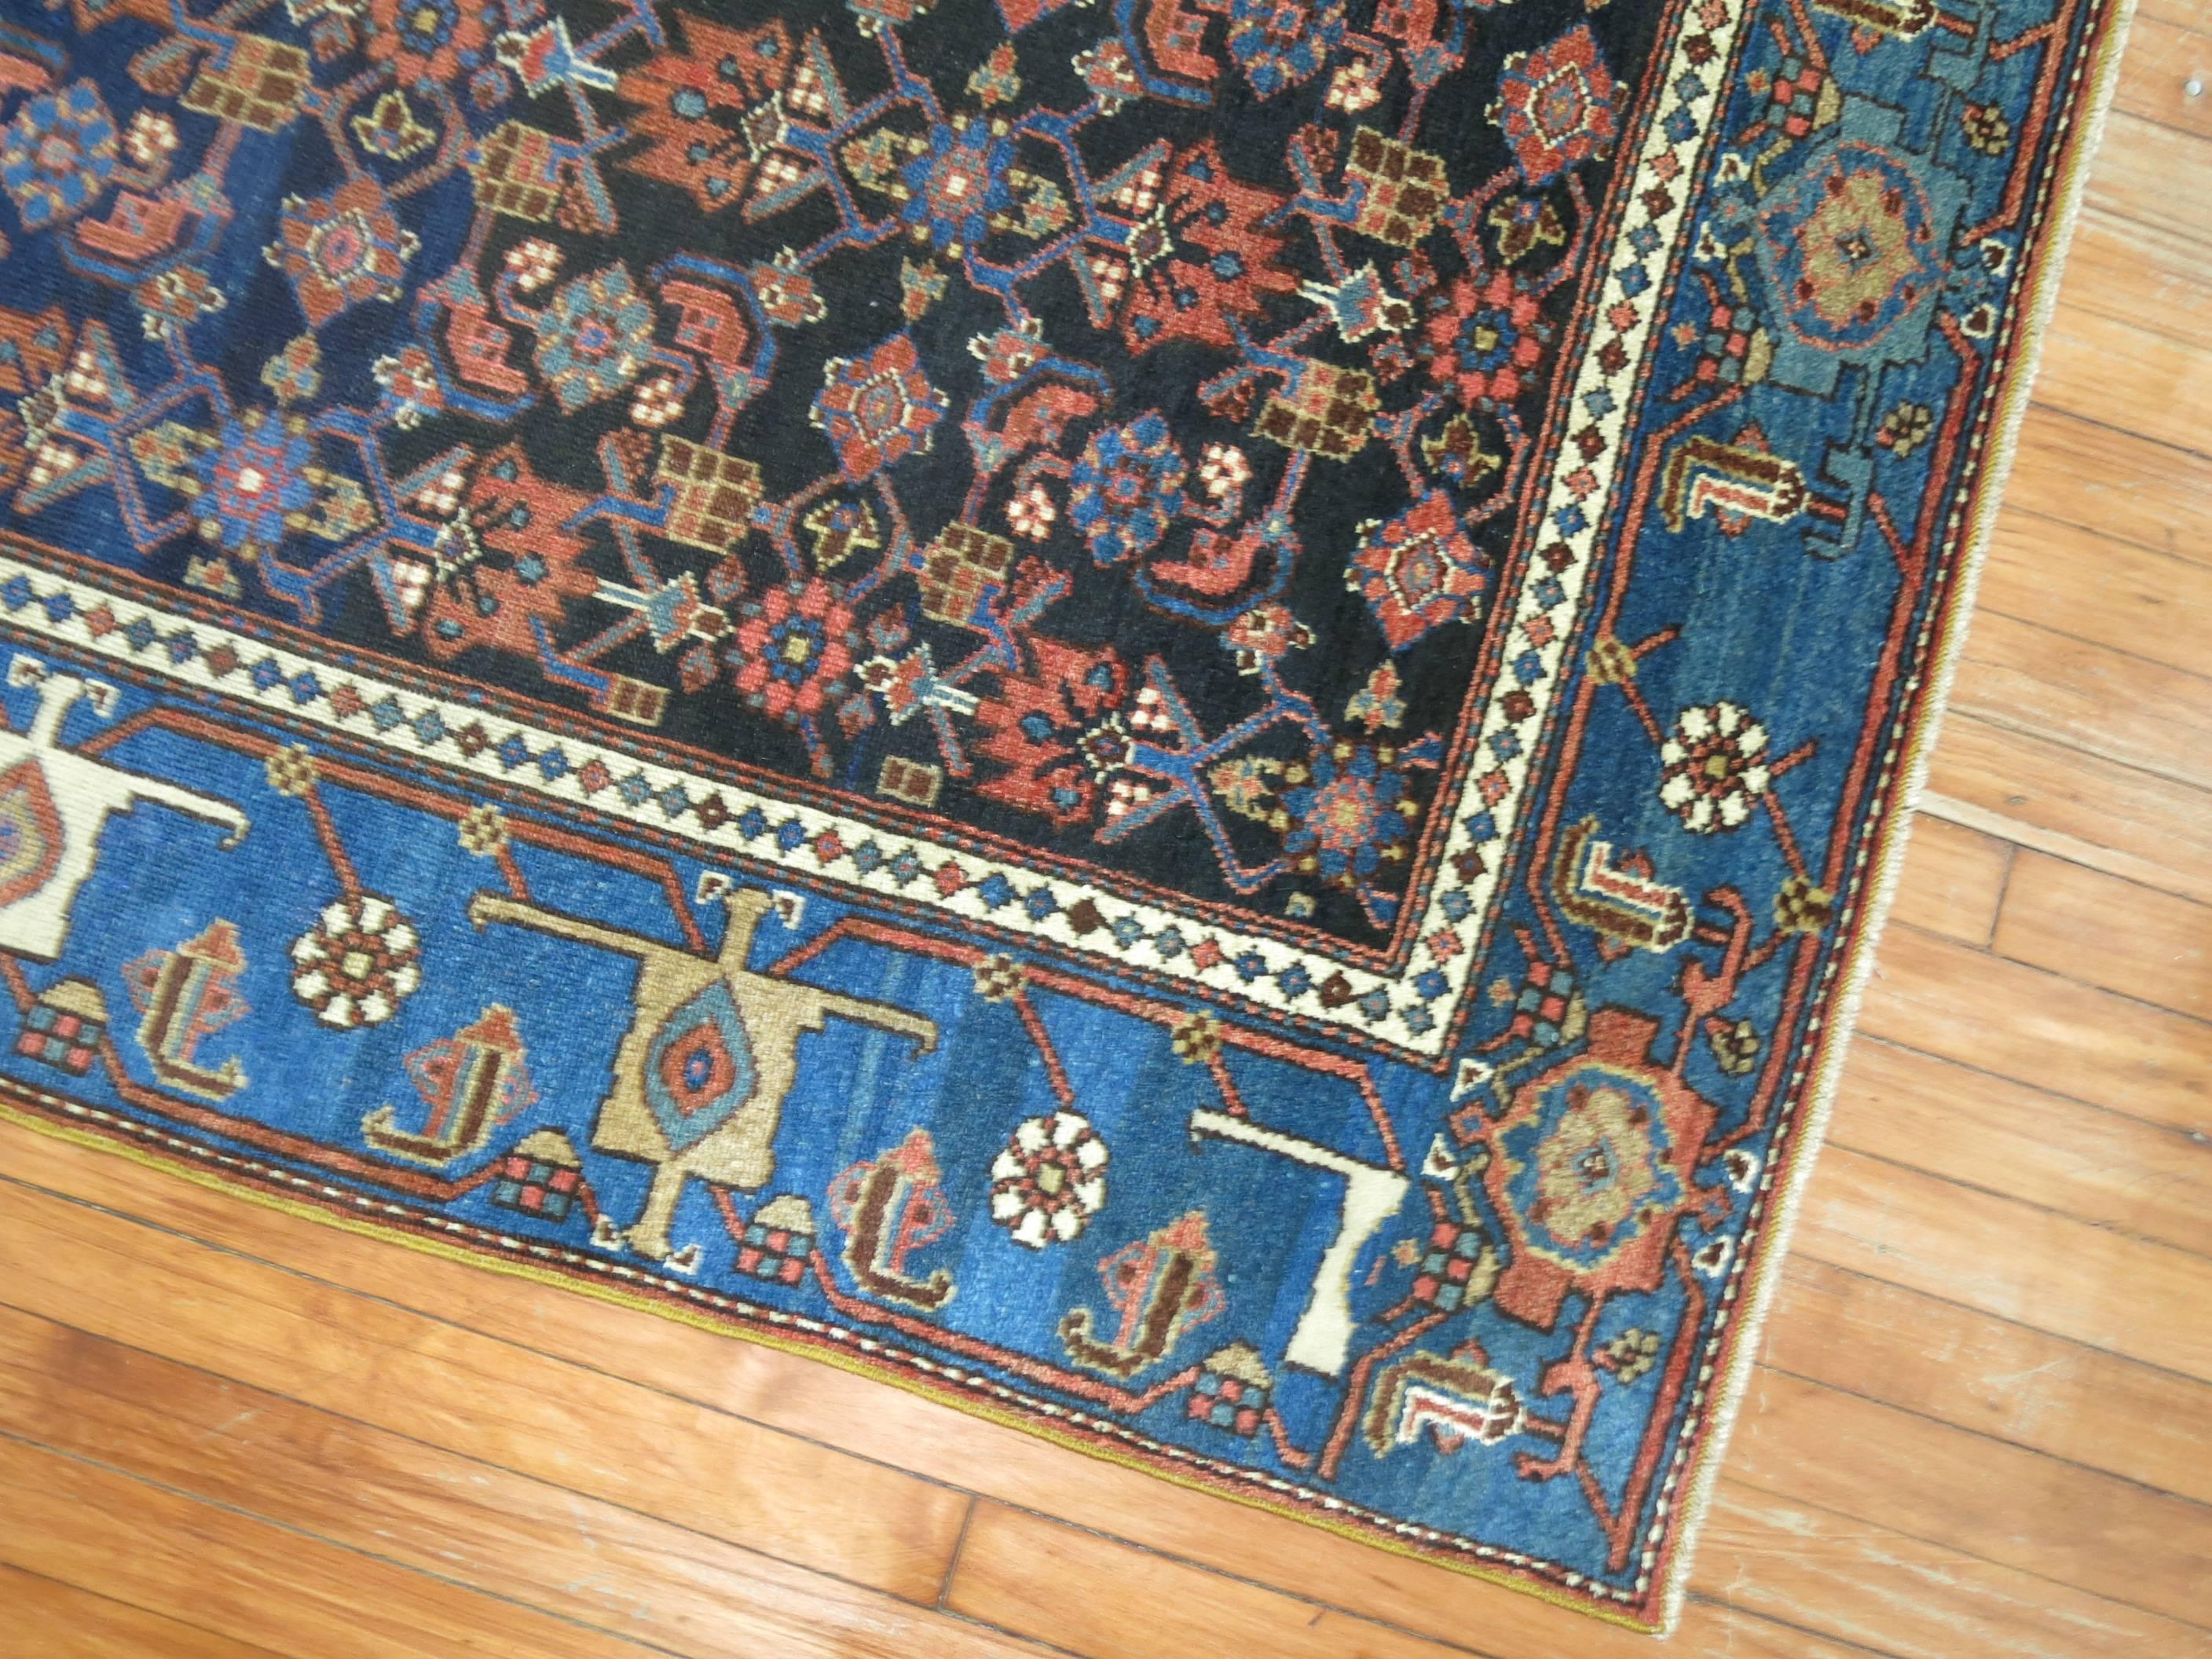 Authentic one of a kind Persian Hamadan rug with navy field and sky blue border.

Hamadan is a major city in Iran that is west of Teheran and north of Malayer and south of the Bijar rug producing areas. Hamadan rugs typically have one heavy cotton